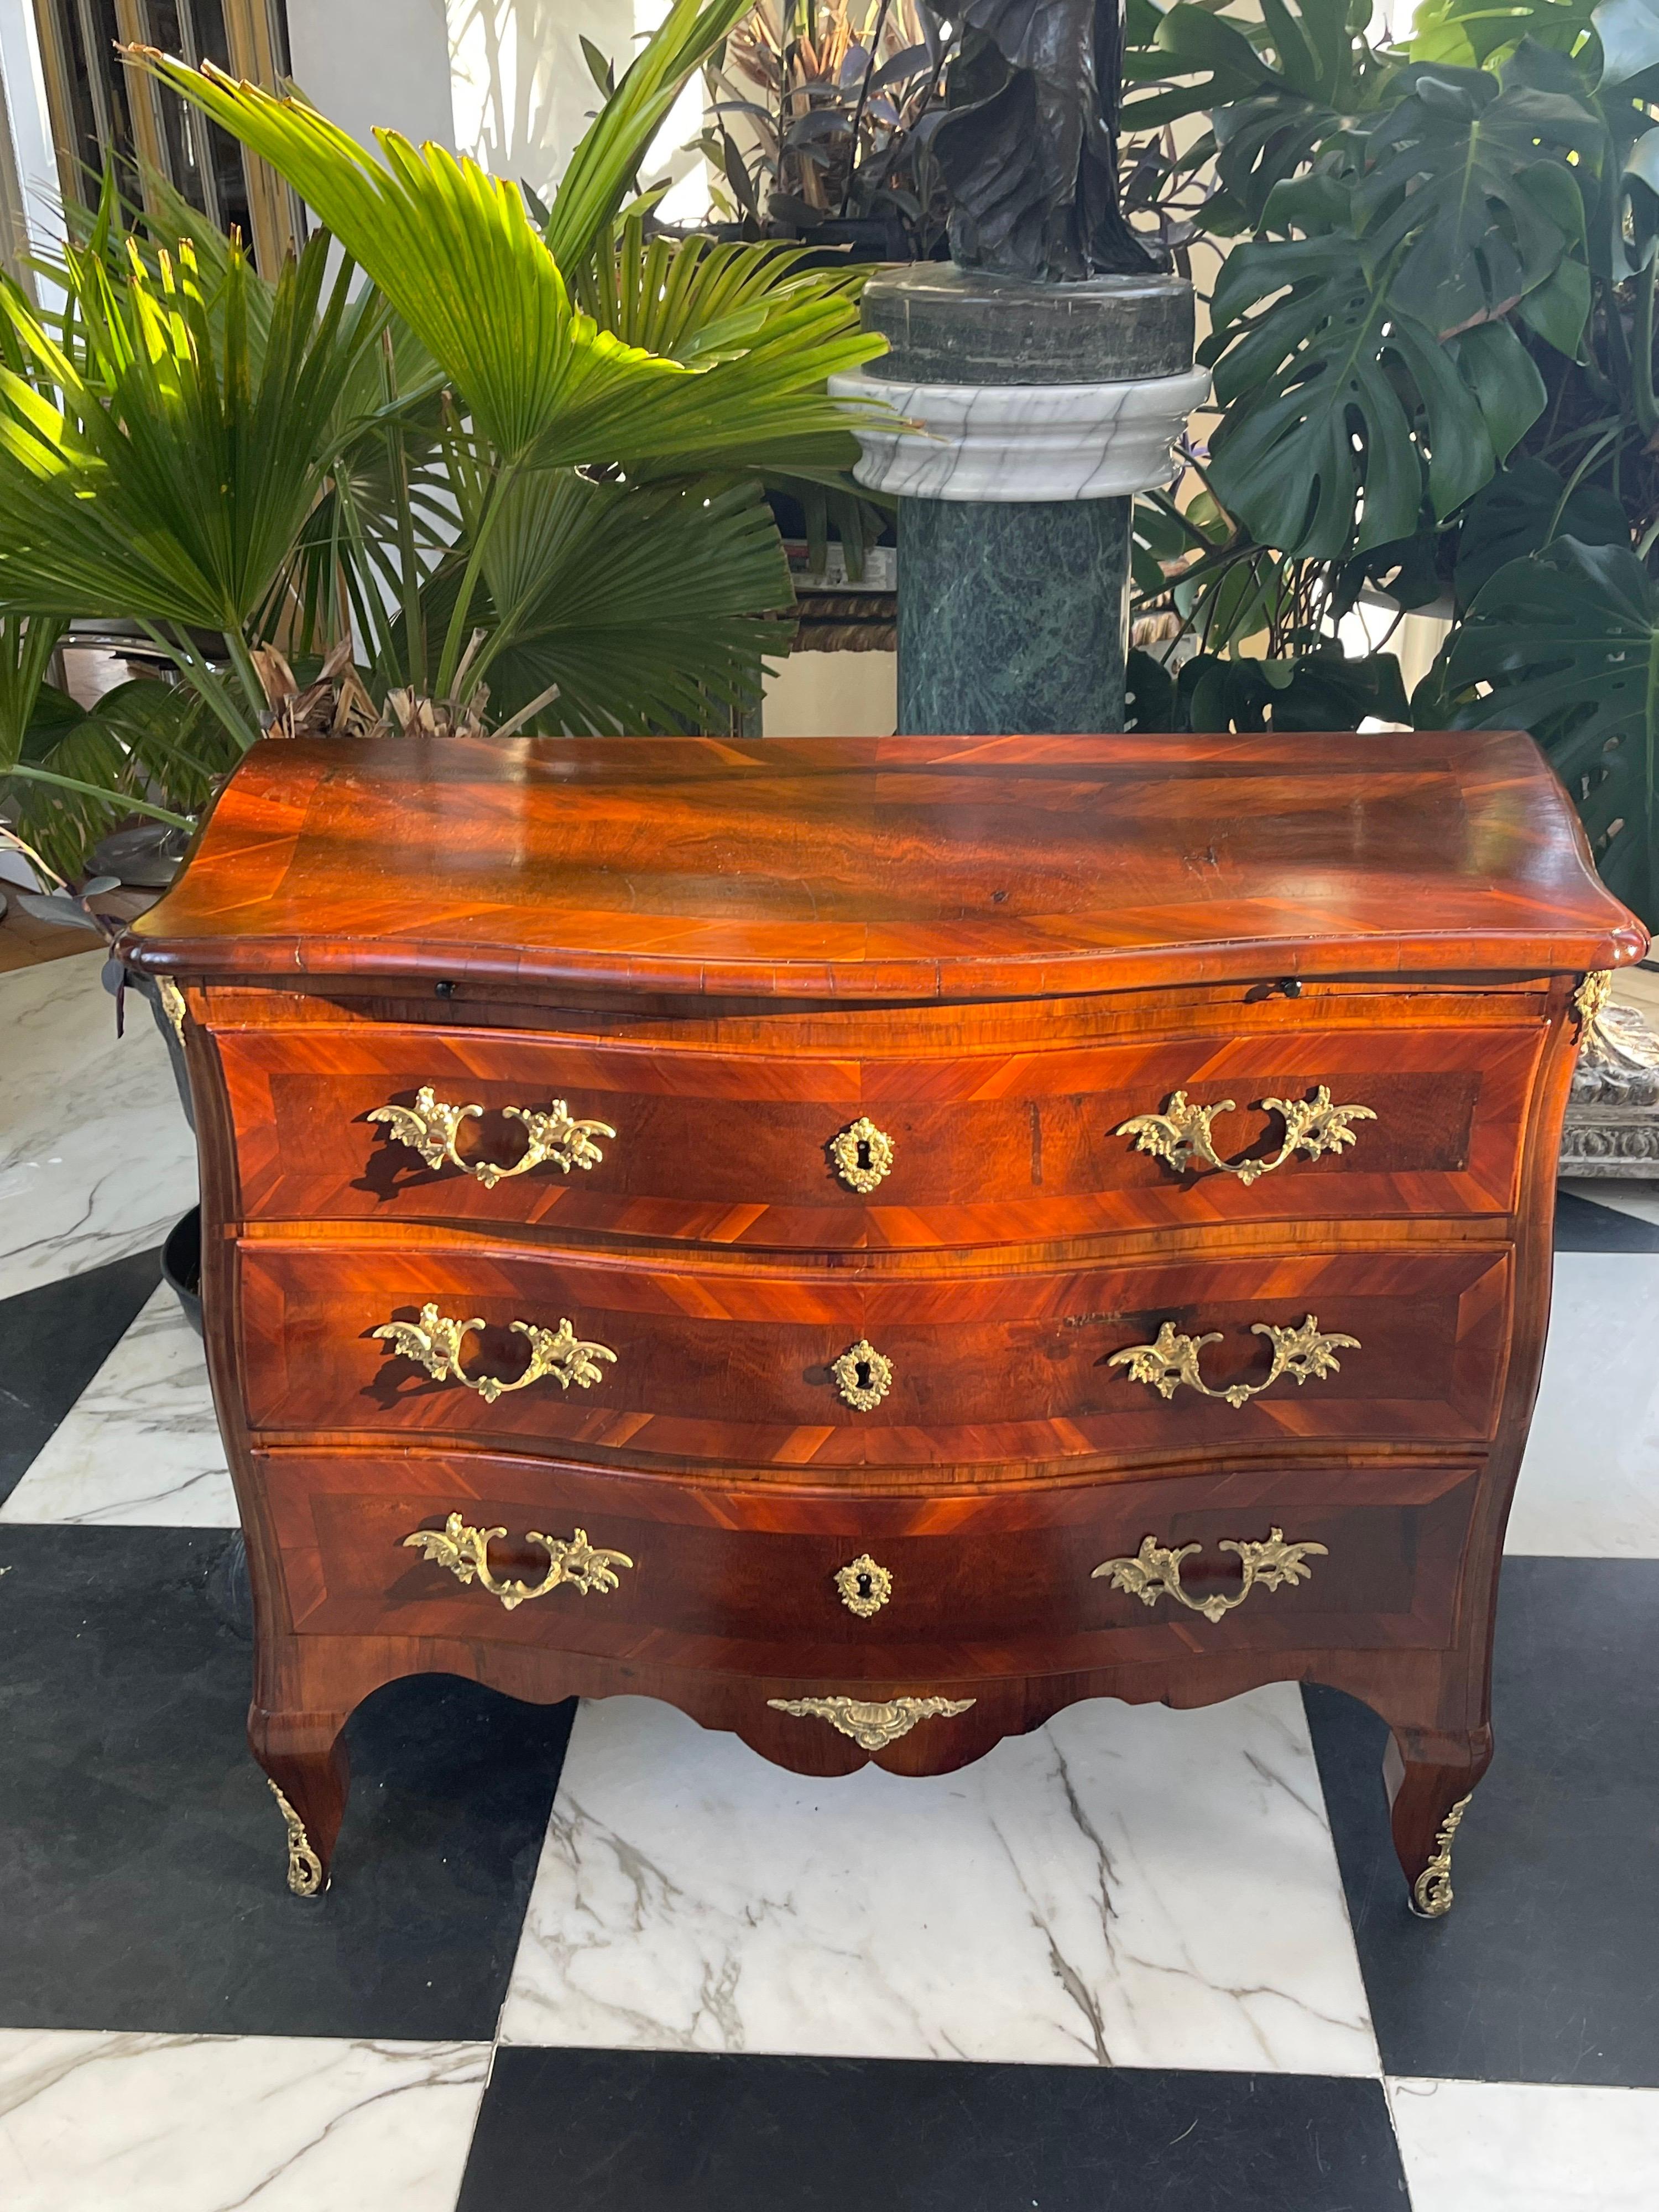 18th century Swedish serpentine front three drawer commode. Gustavian period, ca 1790. The body of chest is beautifully bookmatched veneered in Kingwood & Tulipwood, which has sun faded to the most desirable deep amber color hue. The secondary wood